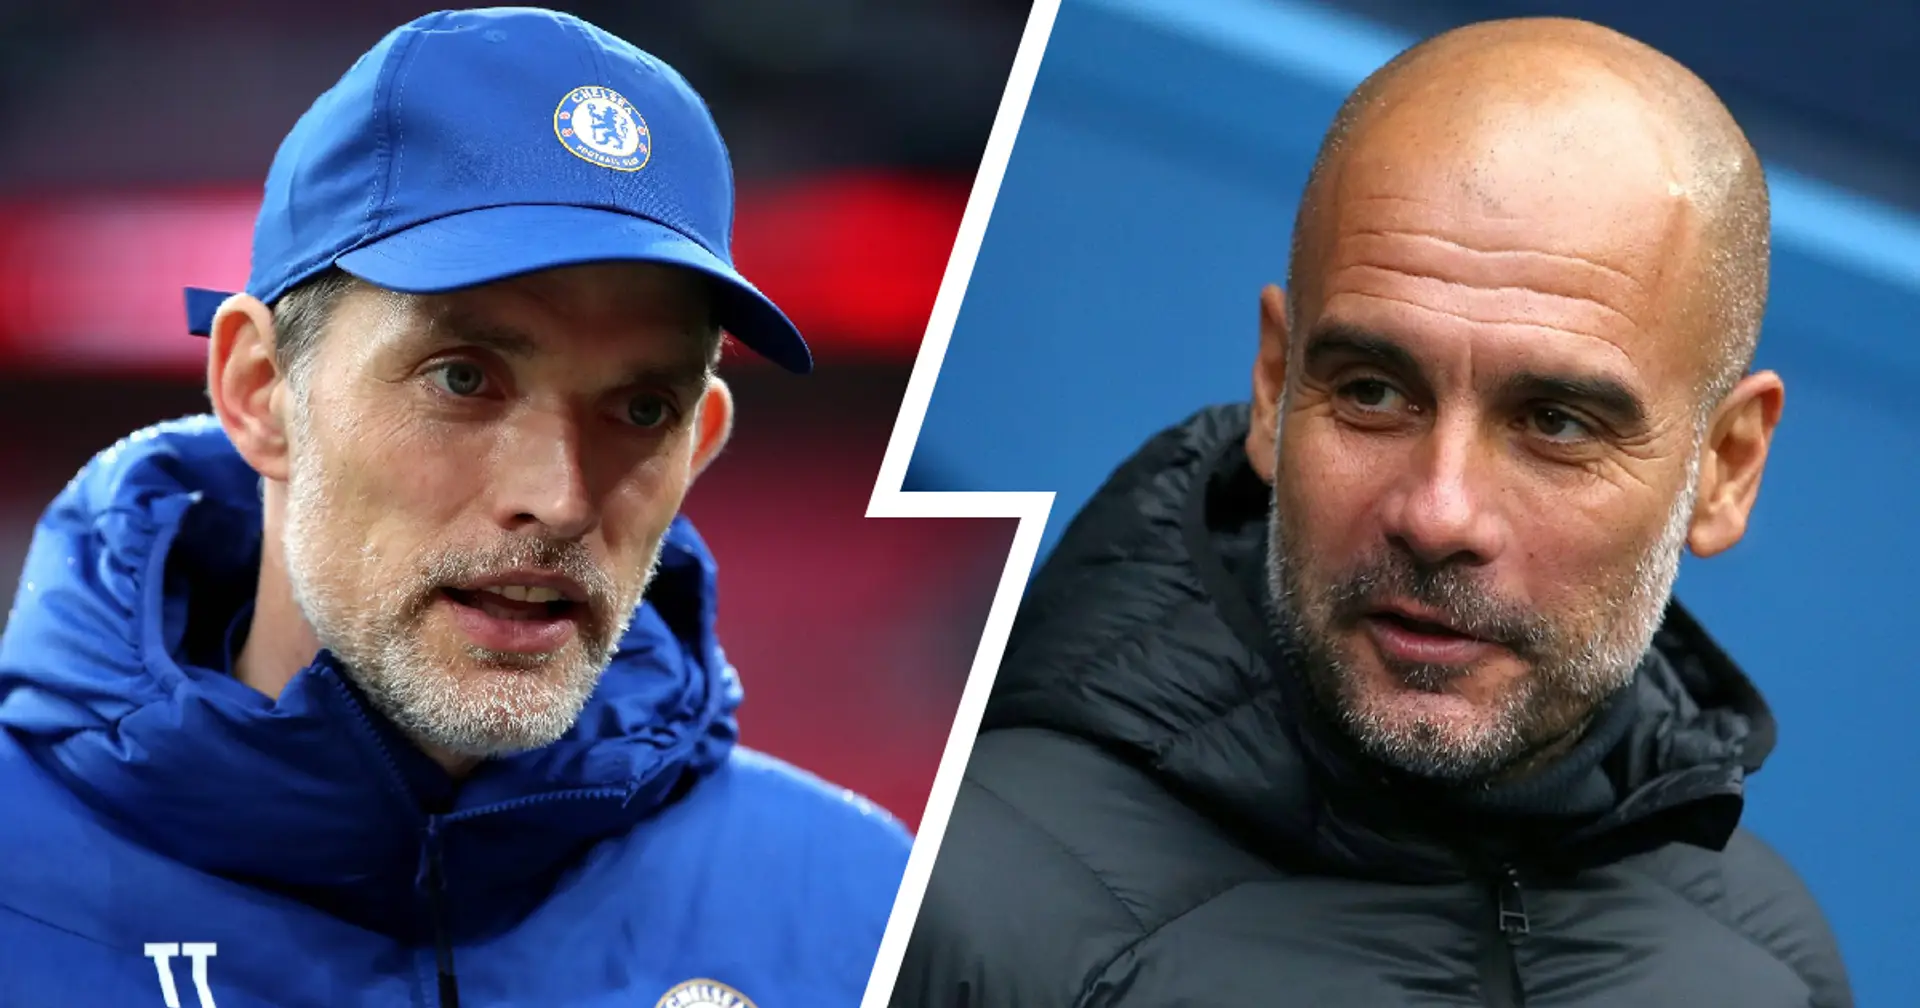 'Since then, we've grown up': Guardiola reveals what he and Tuchel spoke about over dinner years ago